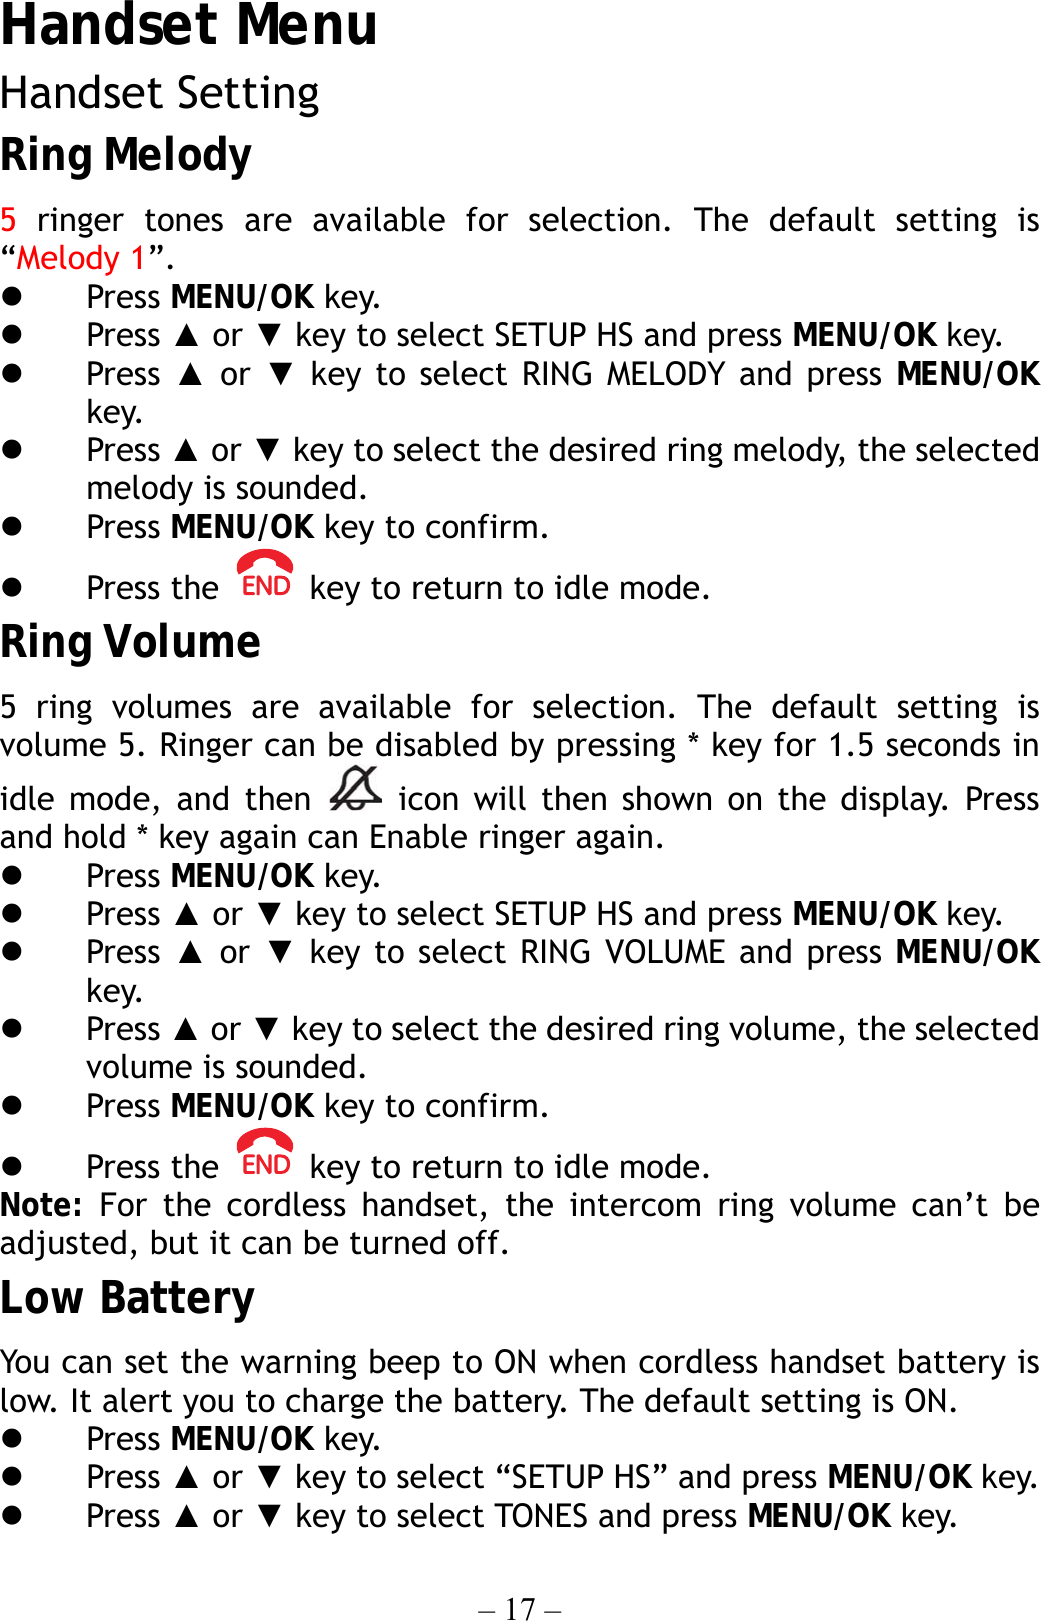 – 17 – Handset Menu Handset Setting Ring Melody 5 ringer tones are available for selection. The default setting is “Melody 1”.   Press MENU/OK key.   Press ▲ or ▼ key to select SETUP HS and press MENU/OK key.   Press  ▲ or ▼ key to select RING MELODY and press MENU/OK key.   Press ▲ or ▼ key to select the desired ring melody, the selected melody is sounded.   Press MENU/OK key to confirm.   Press the    key to return to idle mode. Ring Volume 5 ring volumes are available for selection. The default setting is volume 5. Ringer can be disabled by pressing * key for 1.5 seconds in idle mode, and then   icon will then shown on the display. Press and hold * key again can Enable ringer again.   Press MENU/OK key.   Press ▲ or ▼ key to select SETUP HS and press MENU/OK key.   Press  ▲ or ▼ key to select RING VOLUME and press MENU/OK key.   Press ▲ or ▼ key to select the desired ring volume, the selected volume is sounded.   Press MENU/OK key to confirm.   Press the    key to return to idle mode. Note: For the cordless handset, the intercom ring volume can’t be adjusted, but it can be turned off. Low Battery You can set the warning beep to ON when cordless handset battery is low. It alert you to charge the battery. The default setting is ON.   Press MENU/OK key.   Press ▲ or ▼ key to select “SETUP HS” and press MENU/OK key.   Press ▲ or ▼ key to select TONES and press MENU/OK key. 